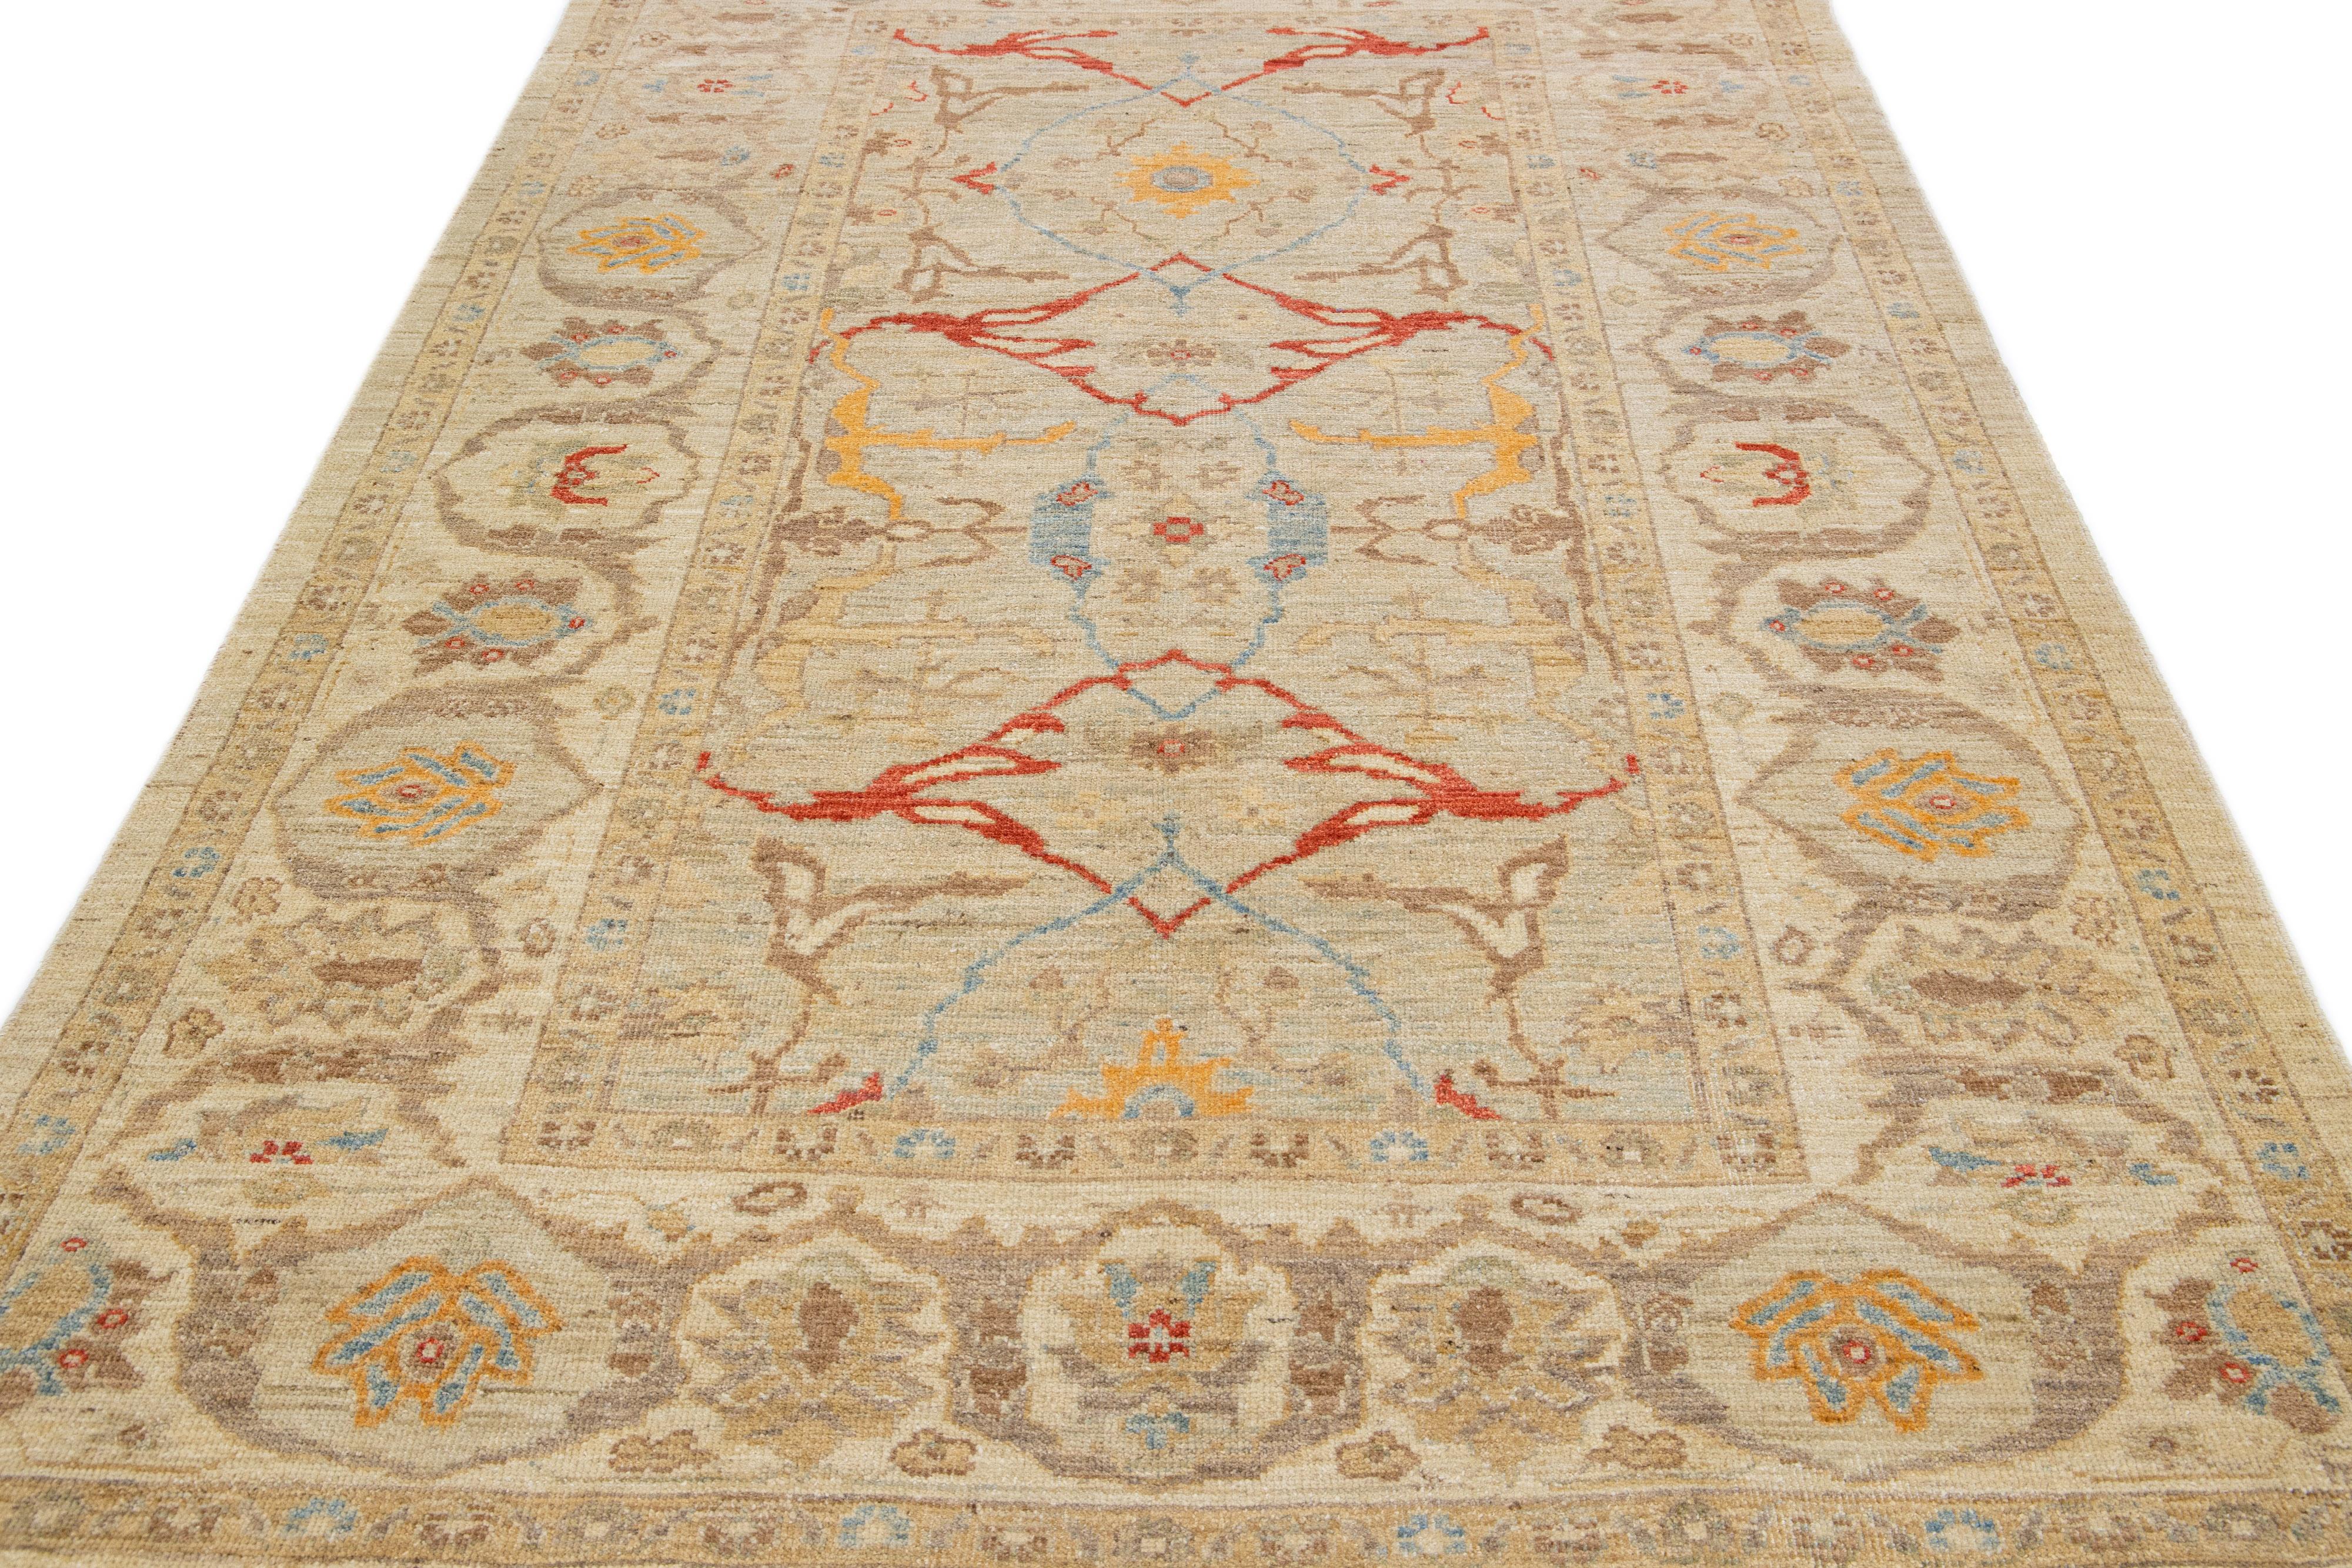 Beautiful modern Sultanabad hand-knotted wool rug with a beige color field. This rug has a designed frame with red, orange, and blue accents in a gorgeous all-over floral design.

This rug measures: 6'1